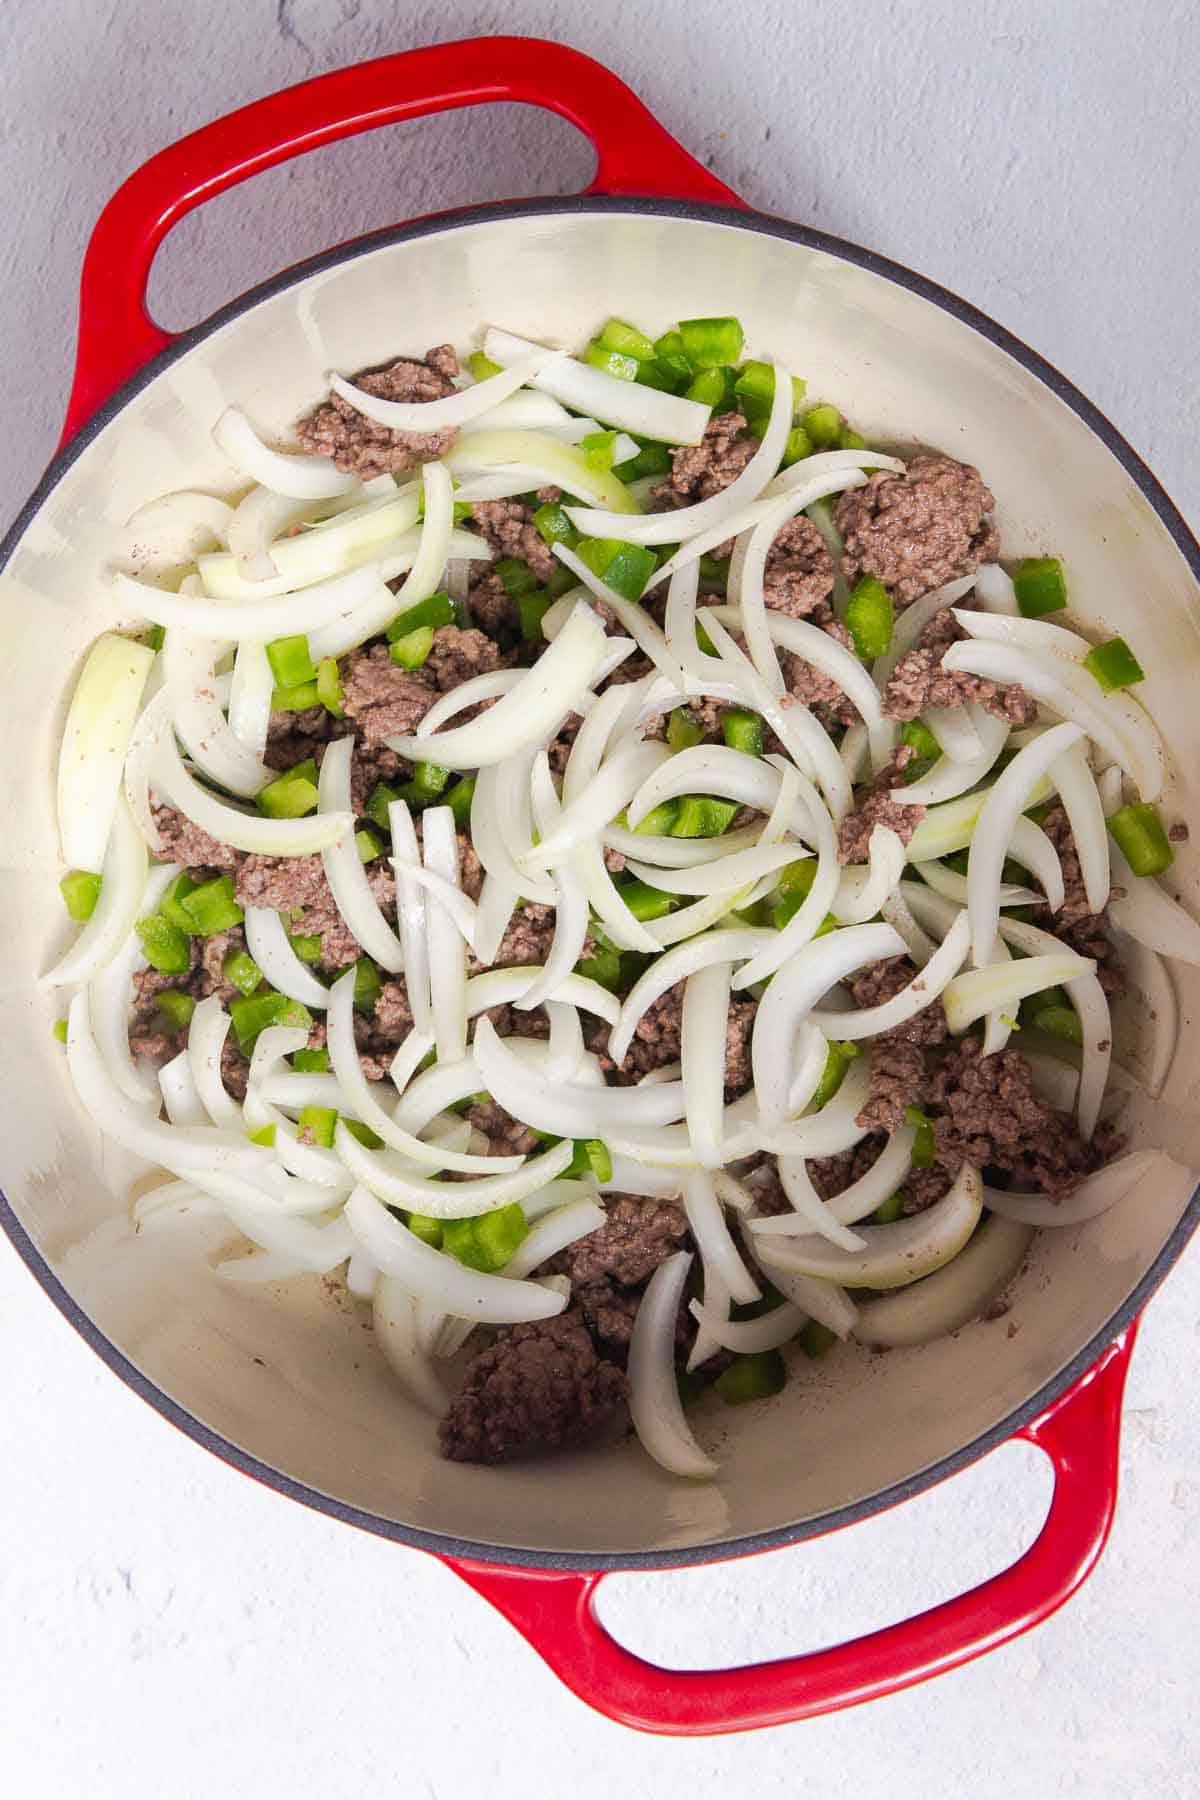 Sliced onions and diced green bell peppers are added to the browned beef